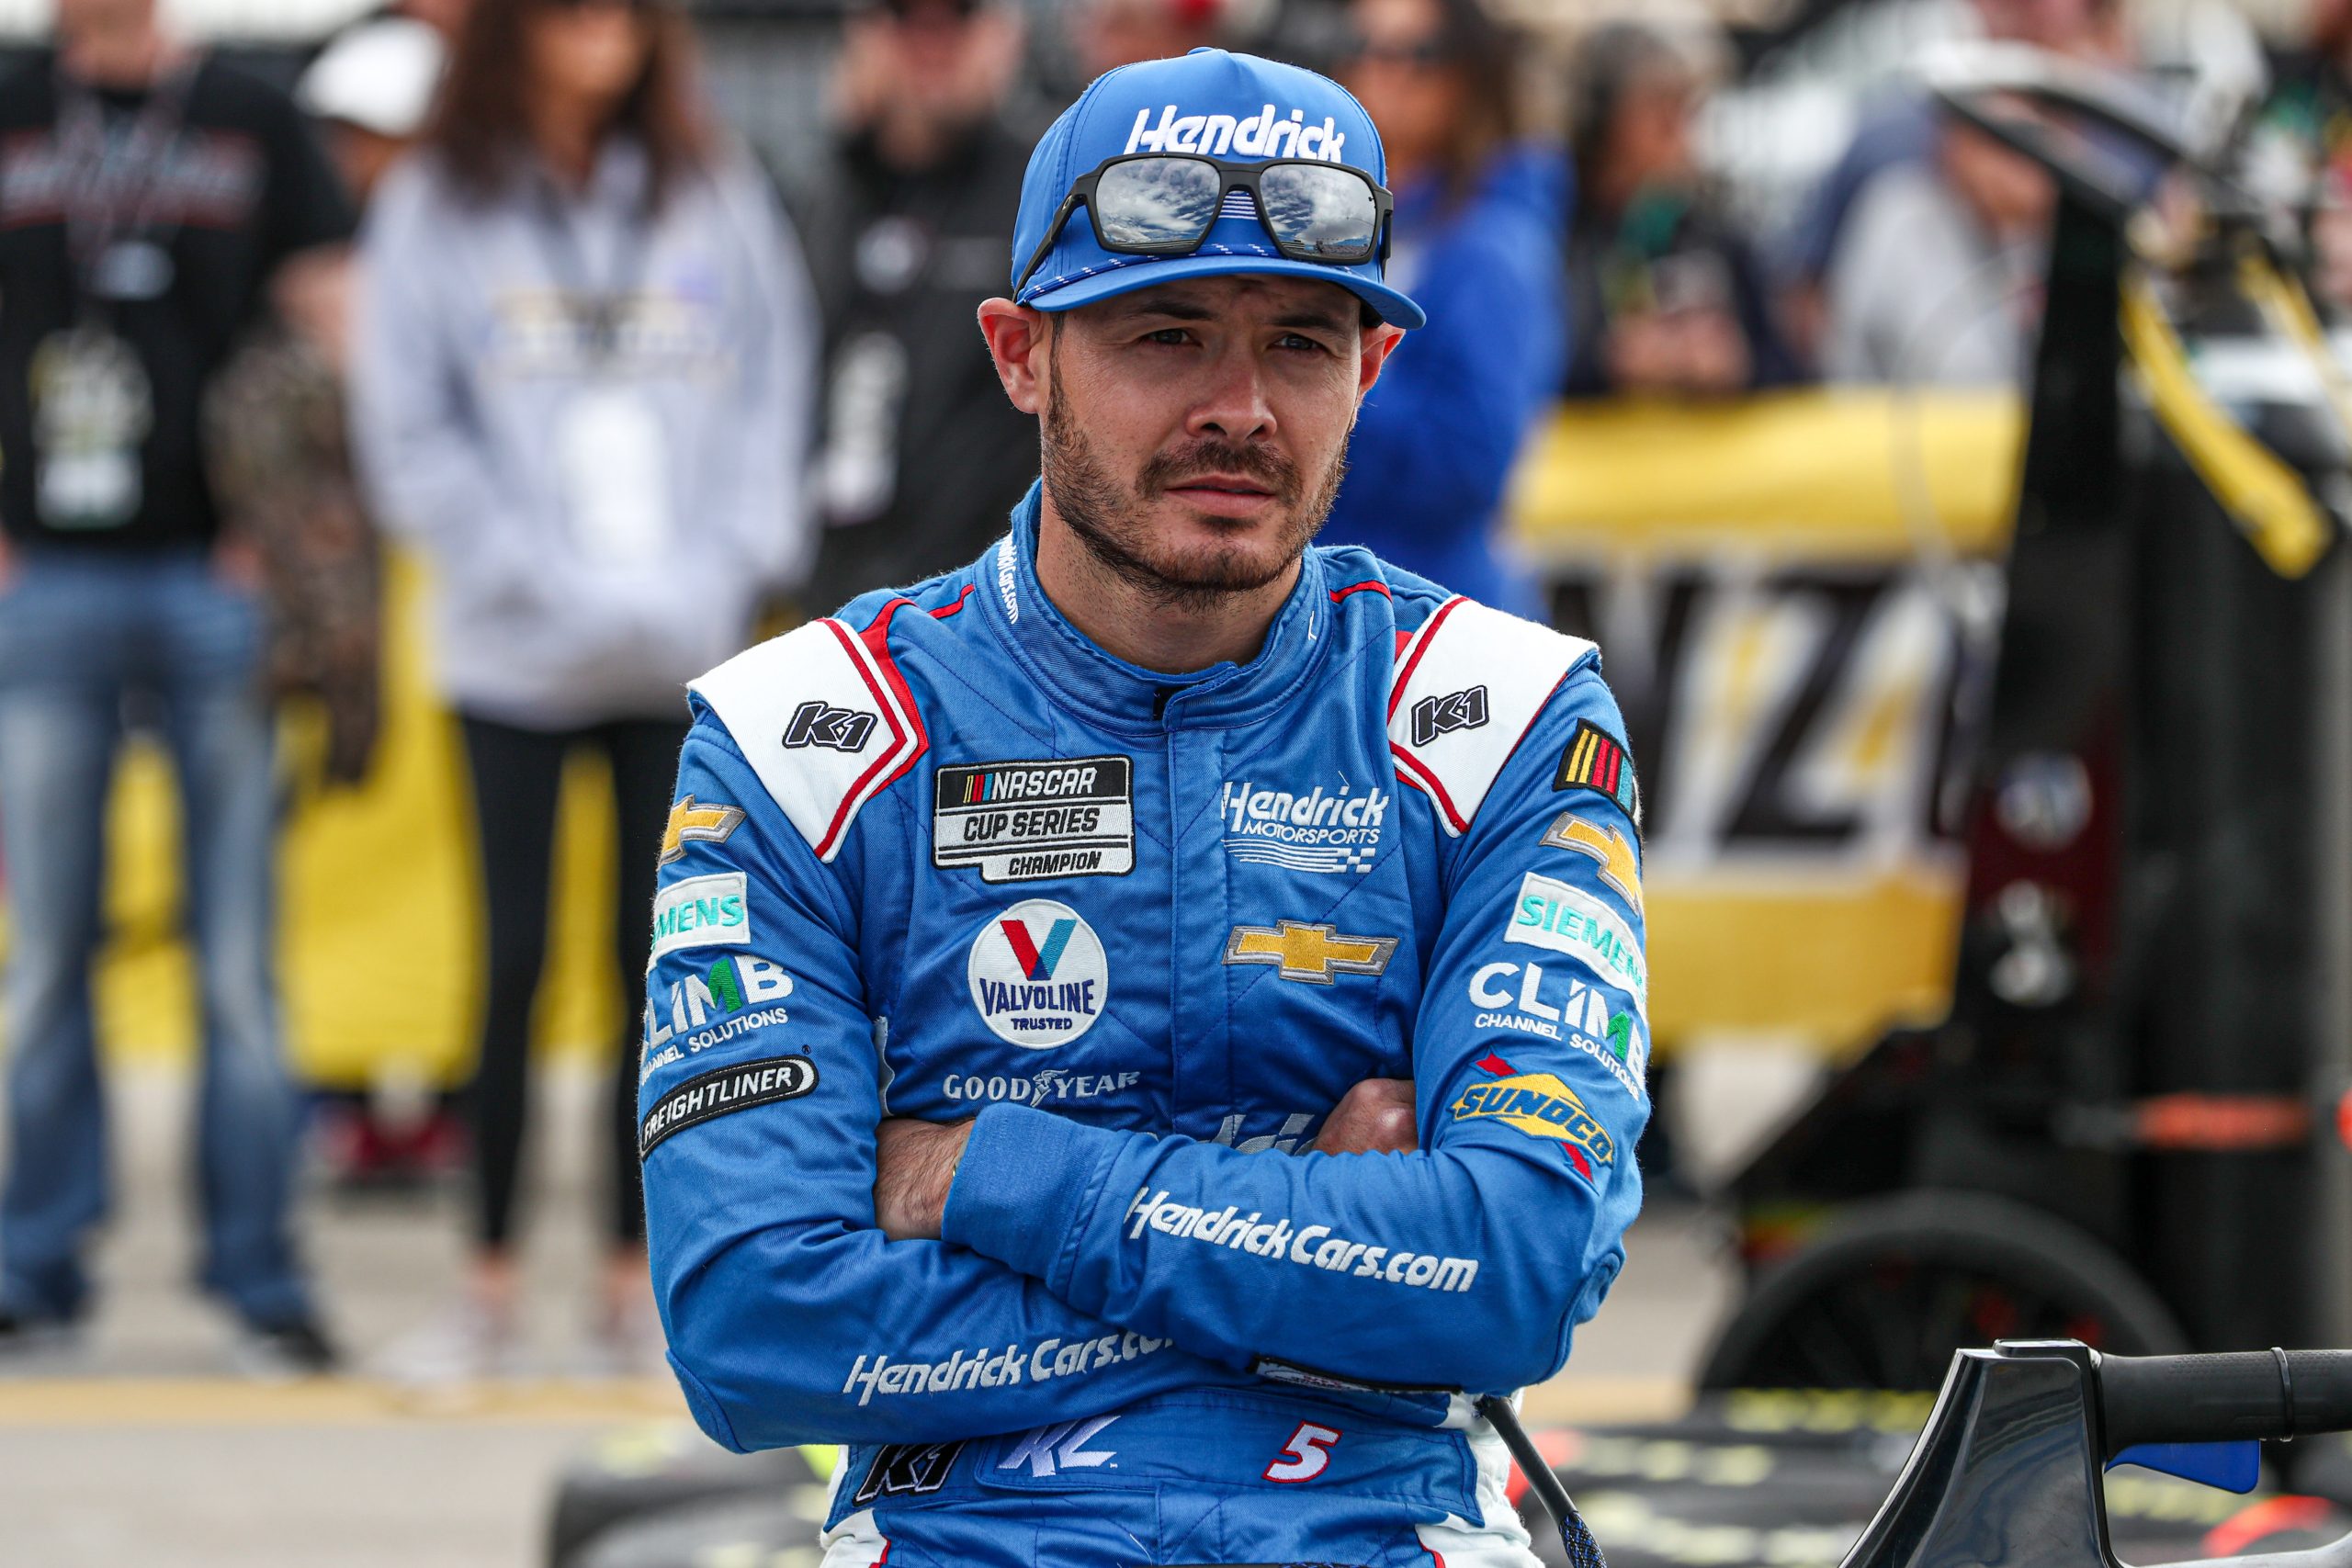 After a couple of less than ideal results at Daytona and Fontana, Kyle Larson eyes his second Las Vegas victory and first of 2023. (Photo: Erik Smith | The Podium Finish)